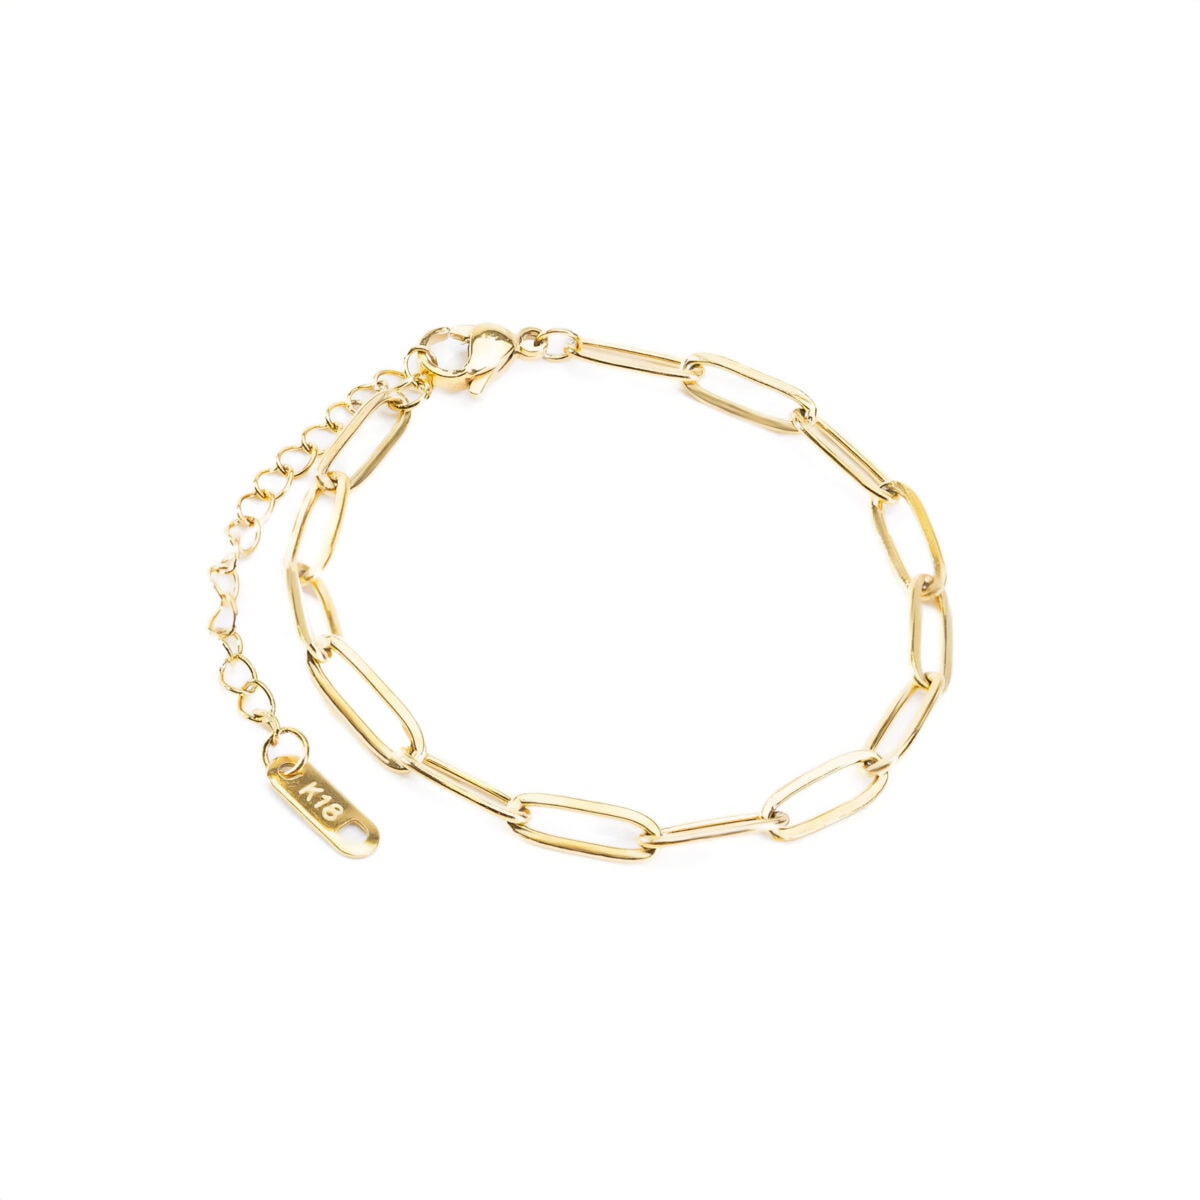 https://m.clubbella.co/product/classic-link-bracelet/ Classic Link Bracelet